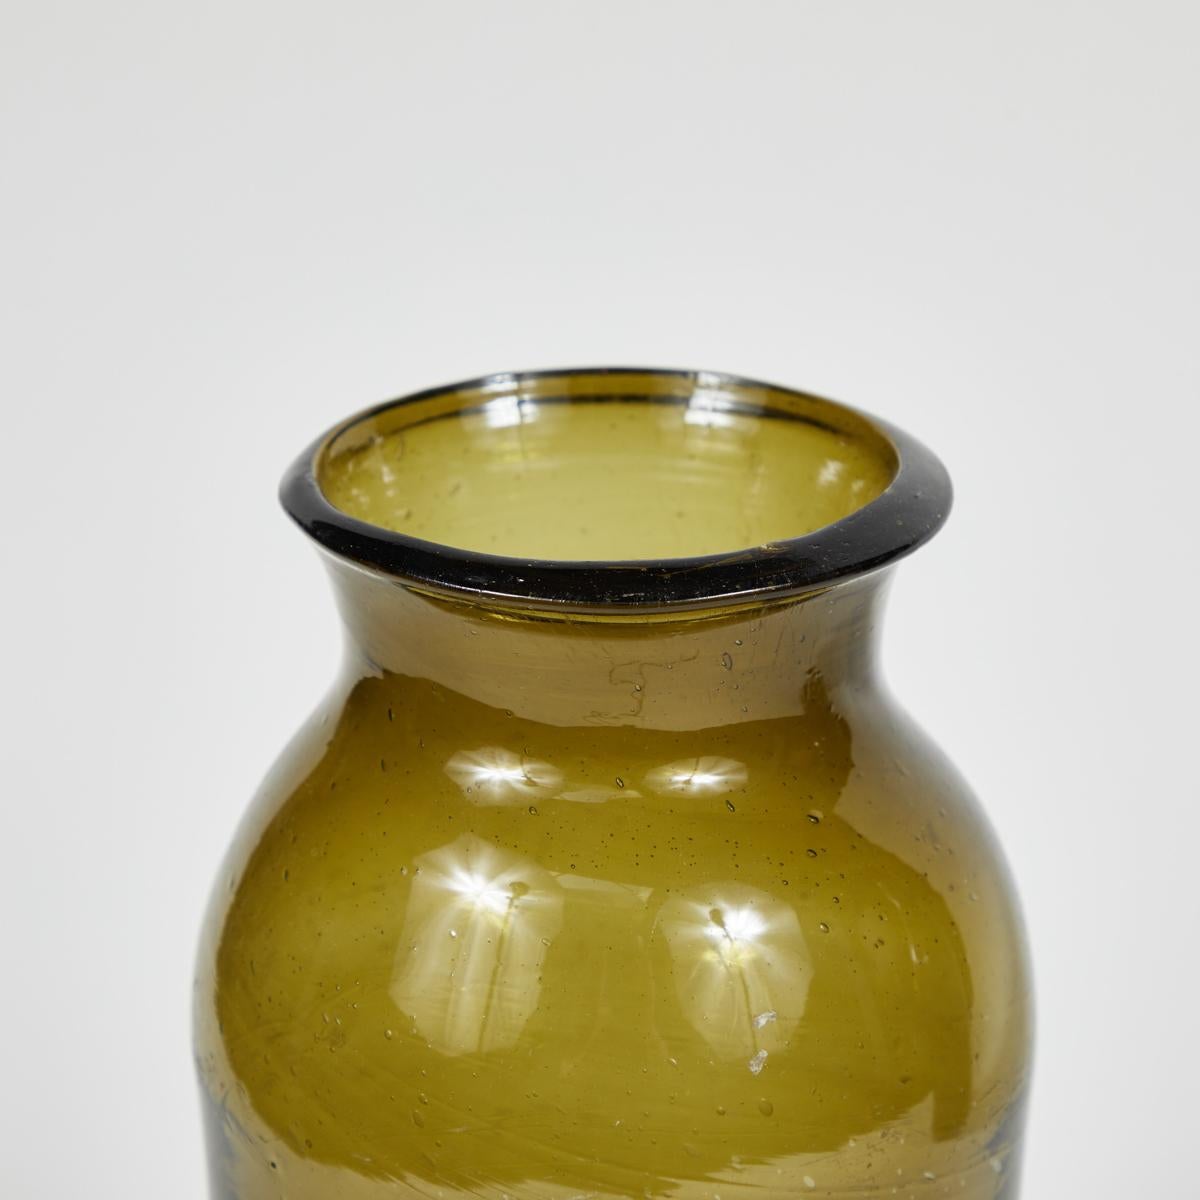 French 19th-century hand-blown glass bottle in beautiful deep olive hue. Rustic and artisanal, this versatile object can be used any number of ways—as a decanter, as a vase, or clustered with other bottles to add height, dimension, and a rich